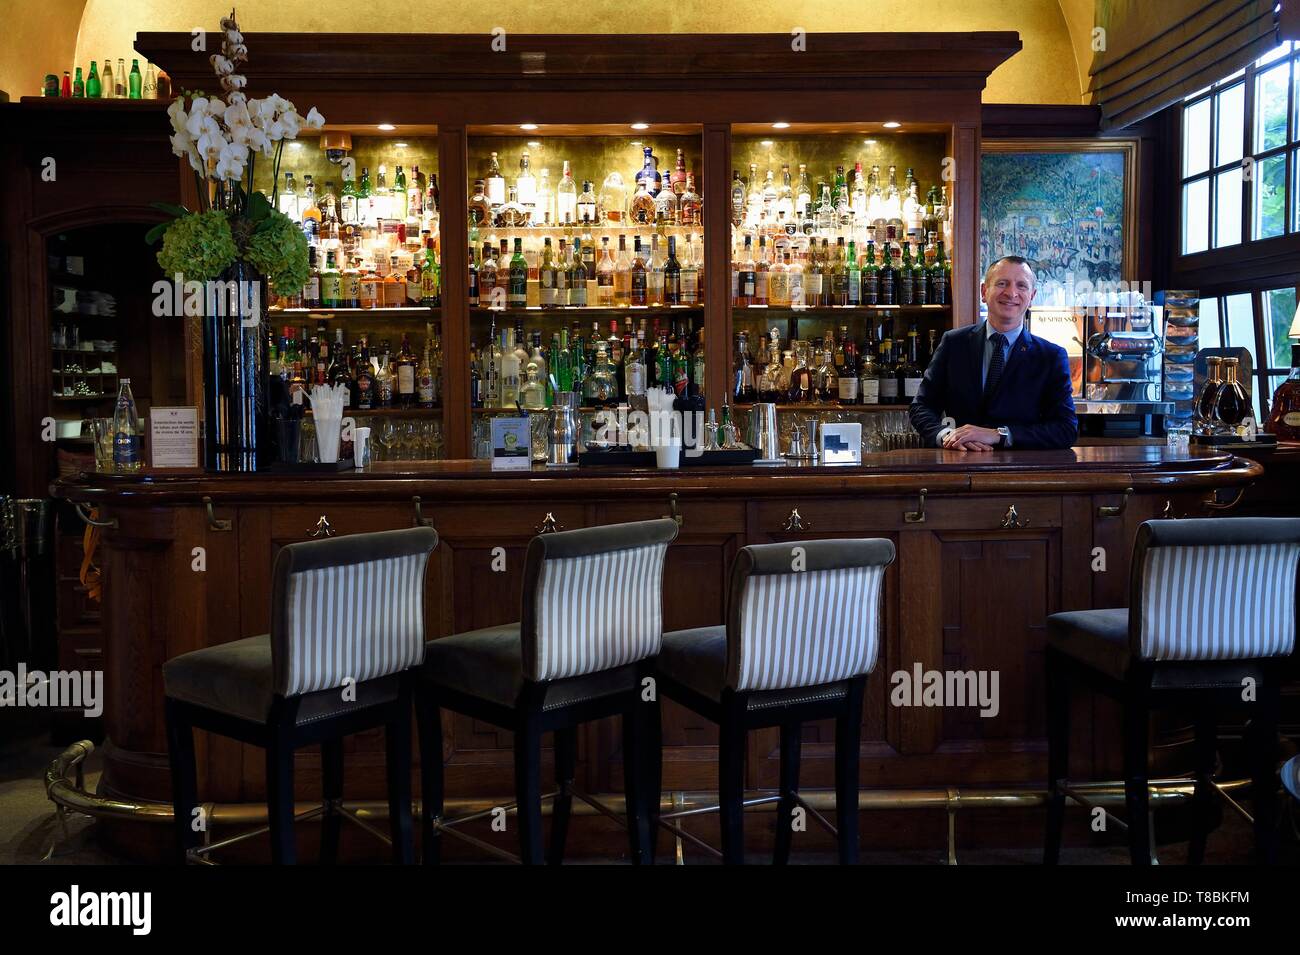 Francia, Calvados, Pays d'Auge, Deauville, Normandy Barriere Hotel Bar, il barista del bar chef Jean Marc Foto Stock